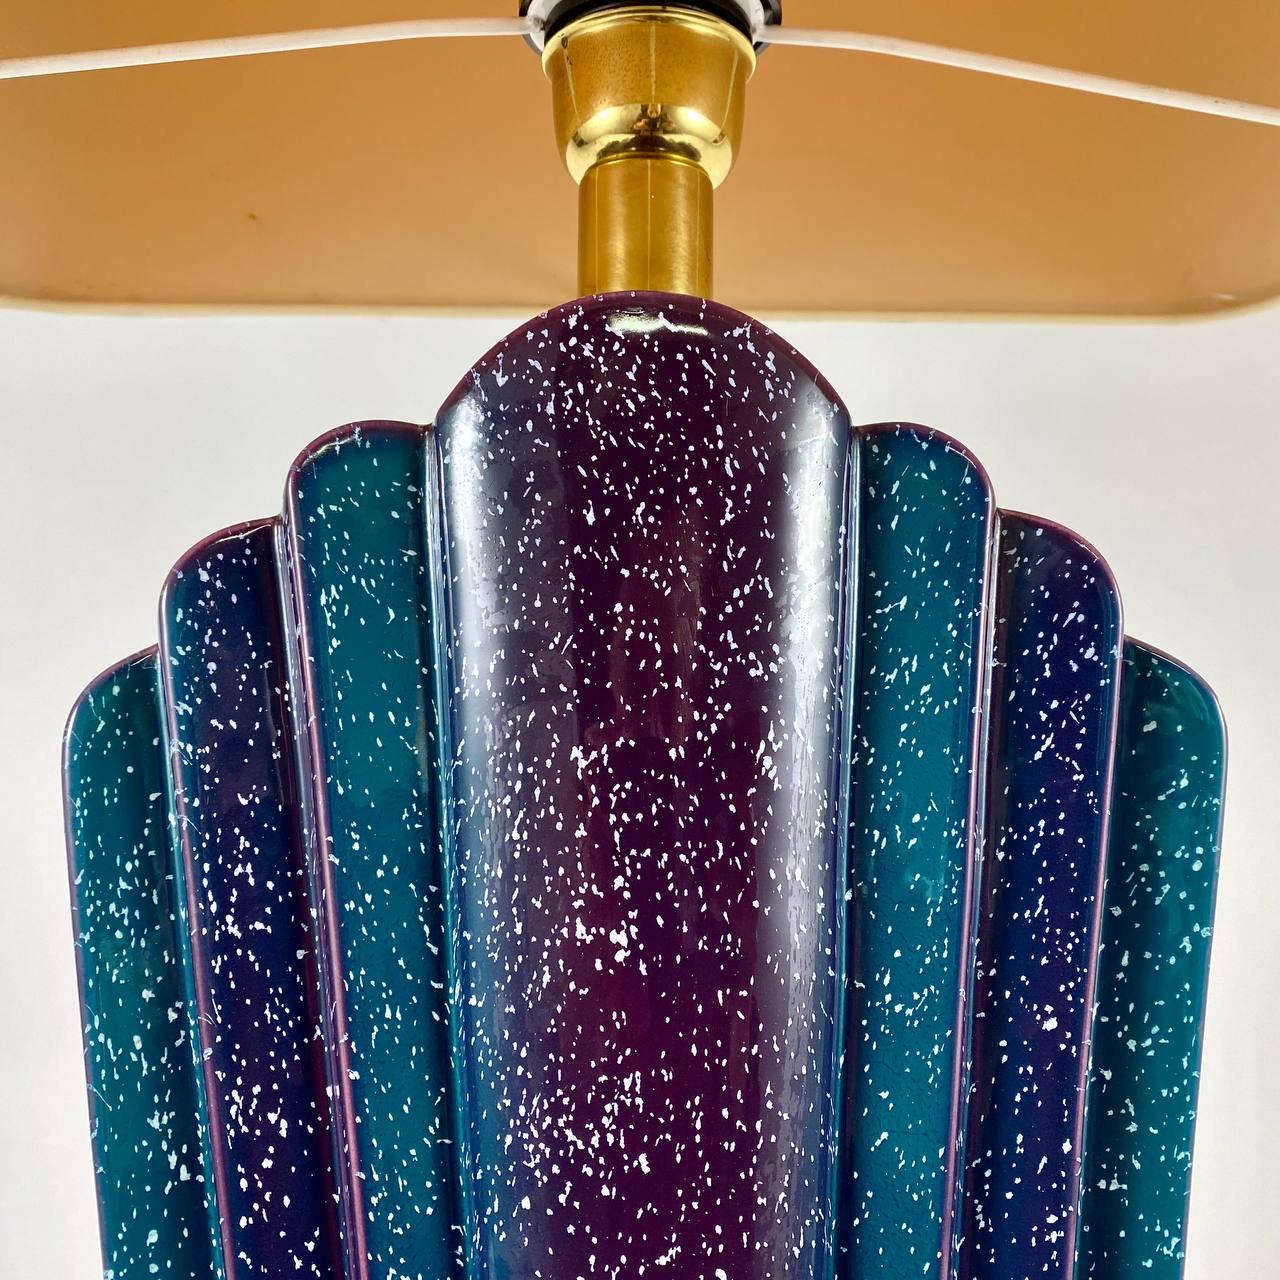 Murano Glass Large Italian Table Lamp 1960s Mid-Century Modern Blue Glass Lamp For Sale